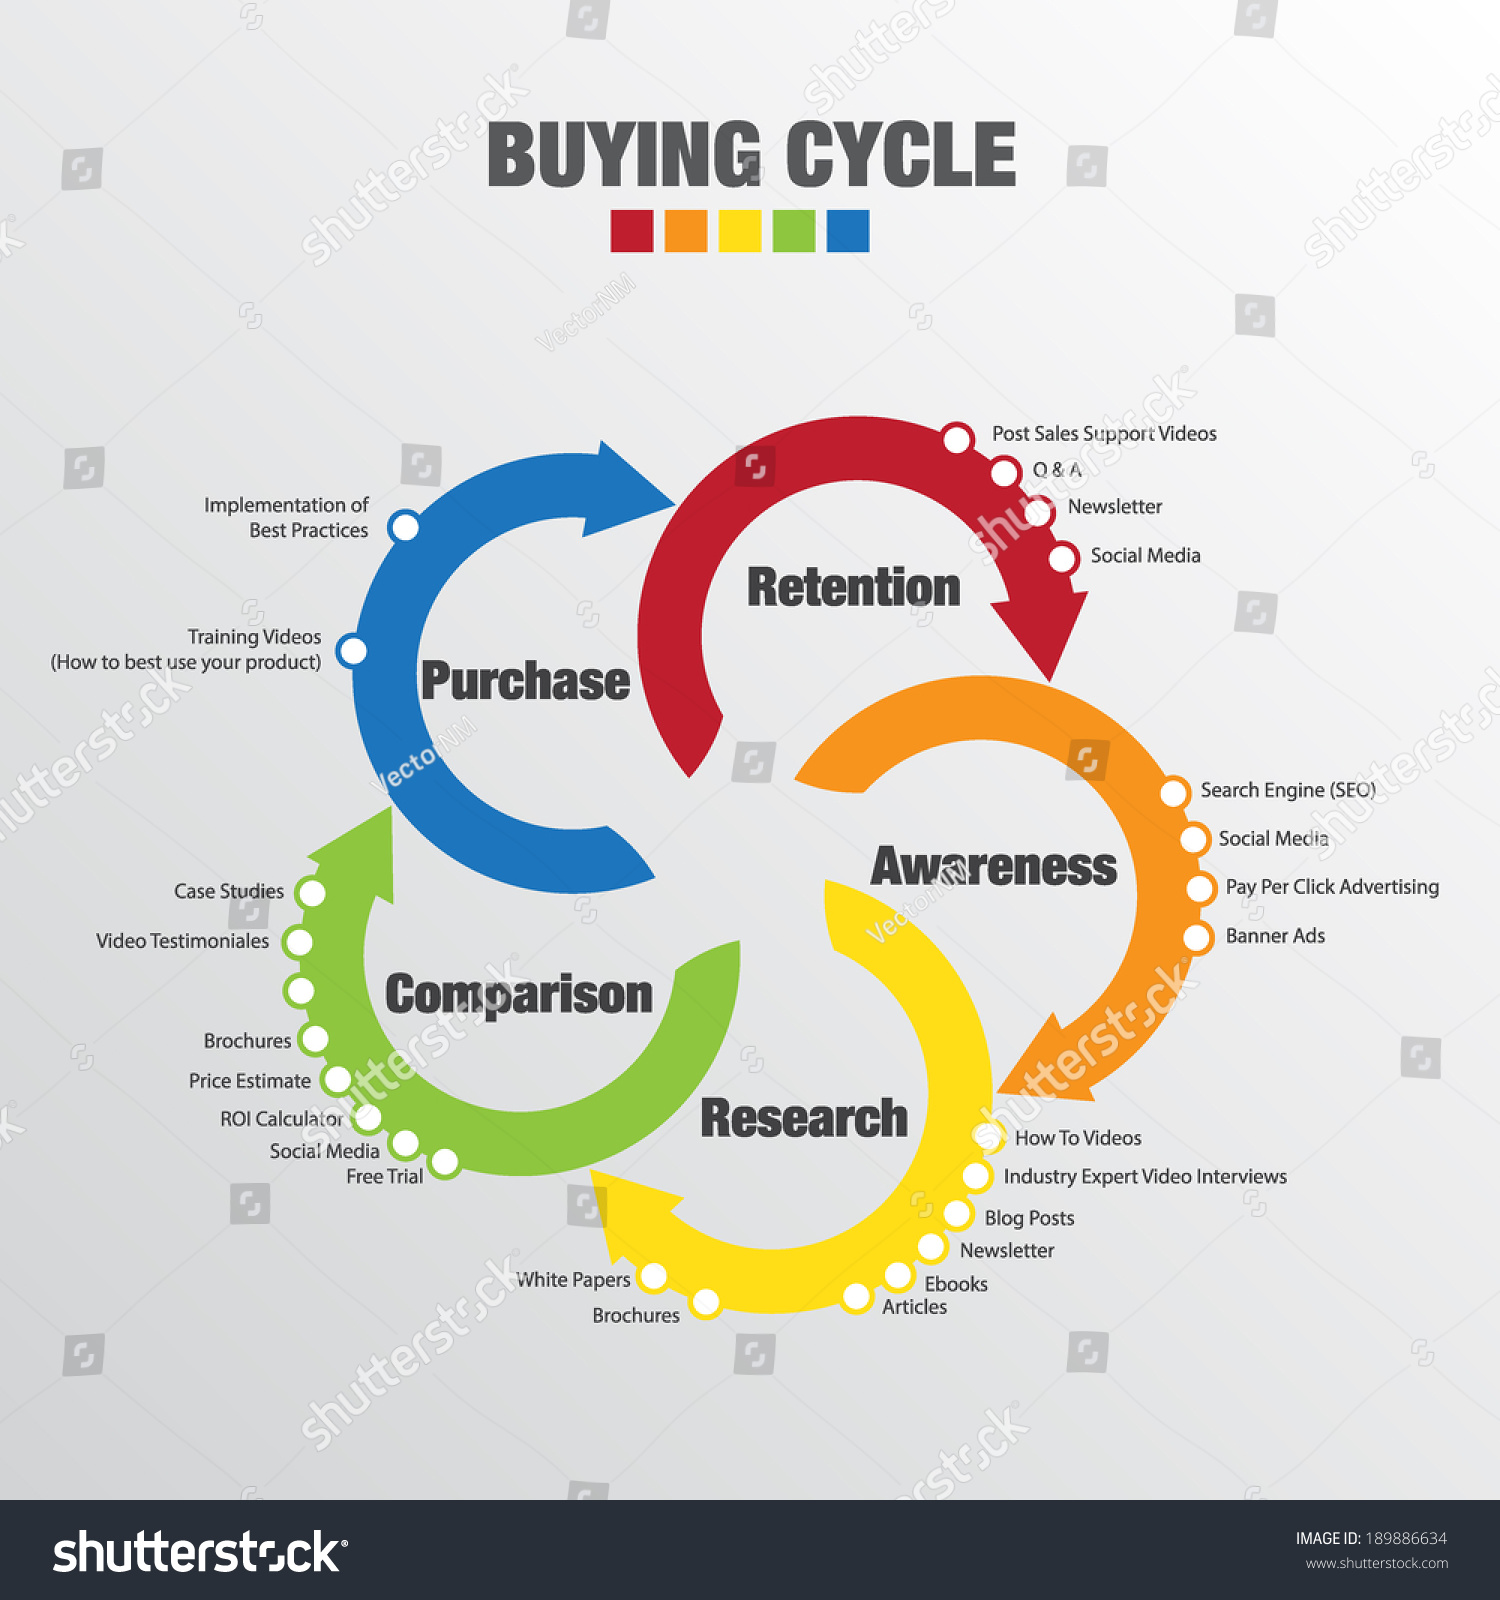 best site for buying cycle